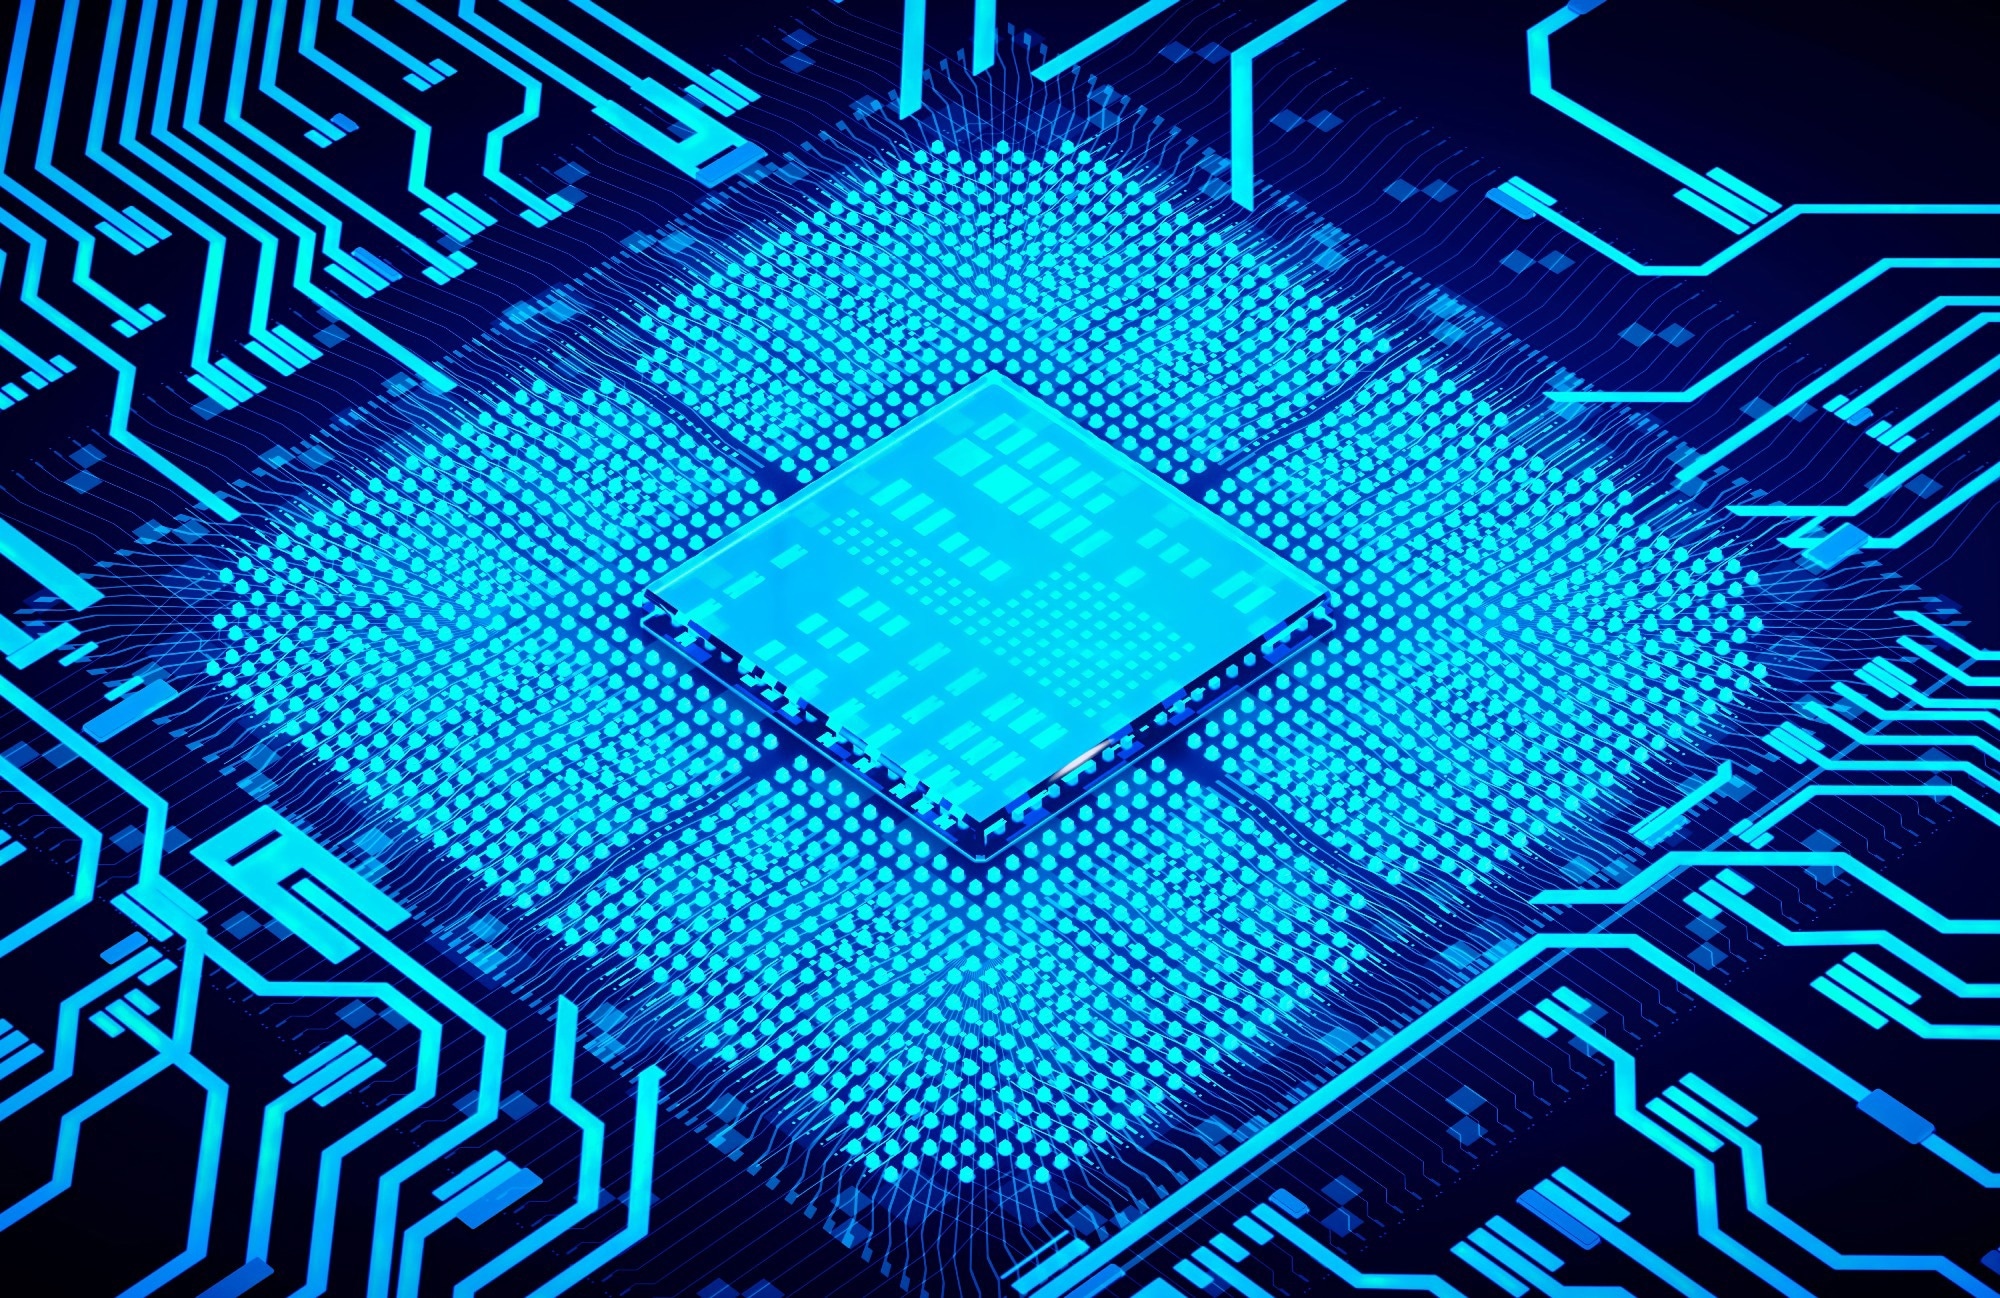 Study: A WSe2-based Computational Event-Driven Sensor with In-Sensor Spiking Neural Network for Motion Recognition. Image credit: jiang jie feng/Shutterstock